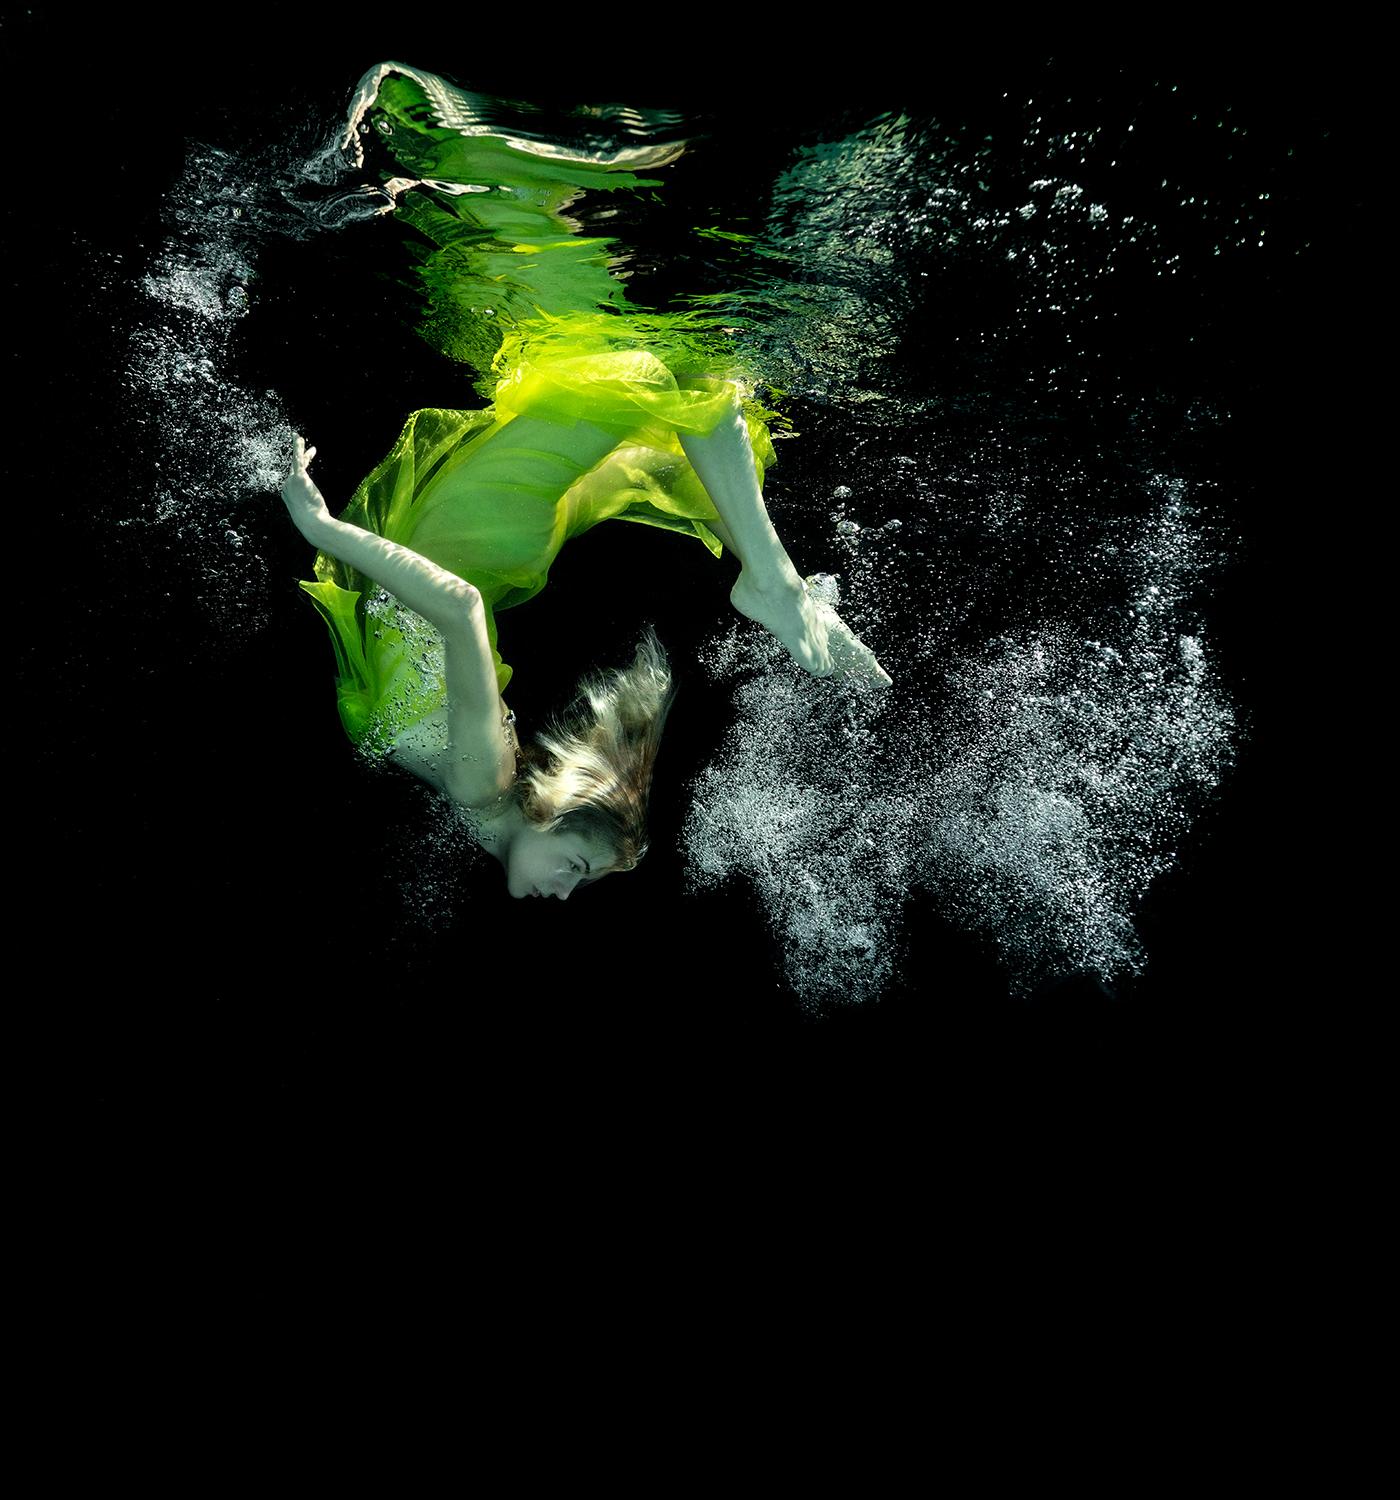 Alex Sher Figurative Photograph - Whirlpool - underwater photograph - print on paper 19" x 17.5"